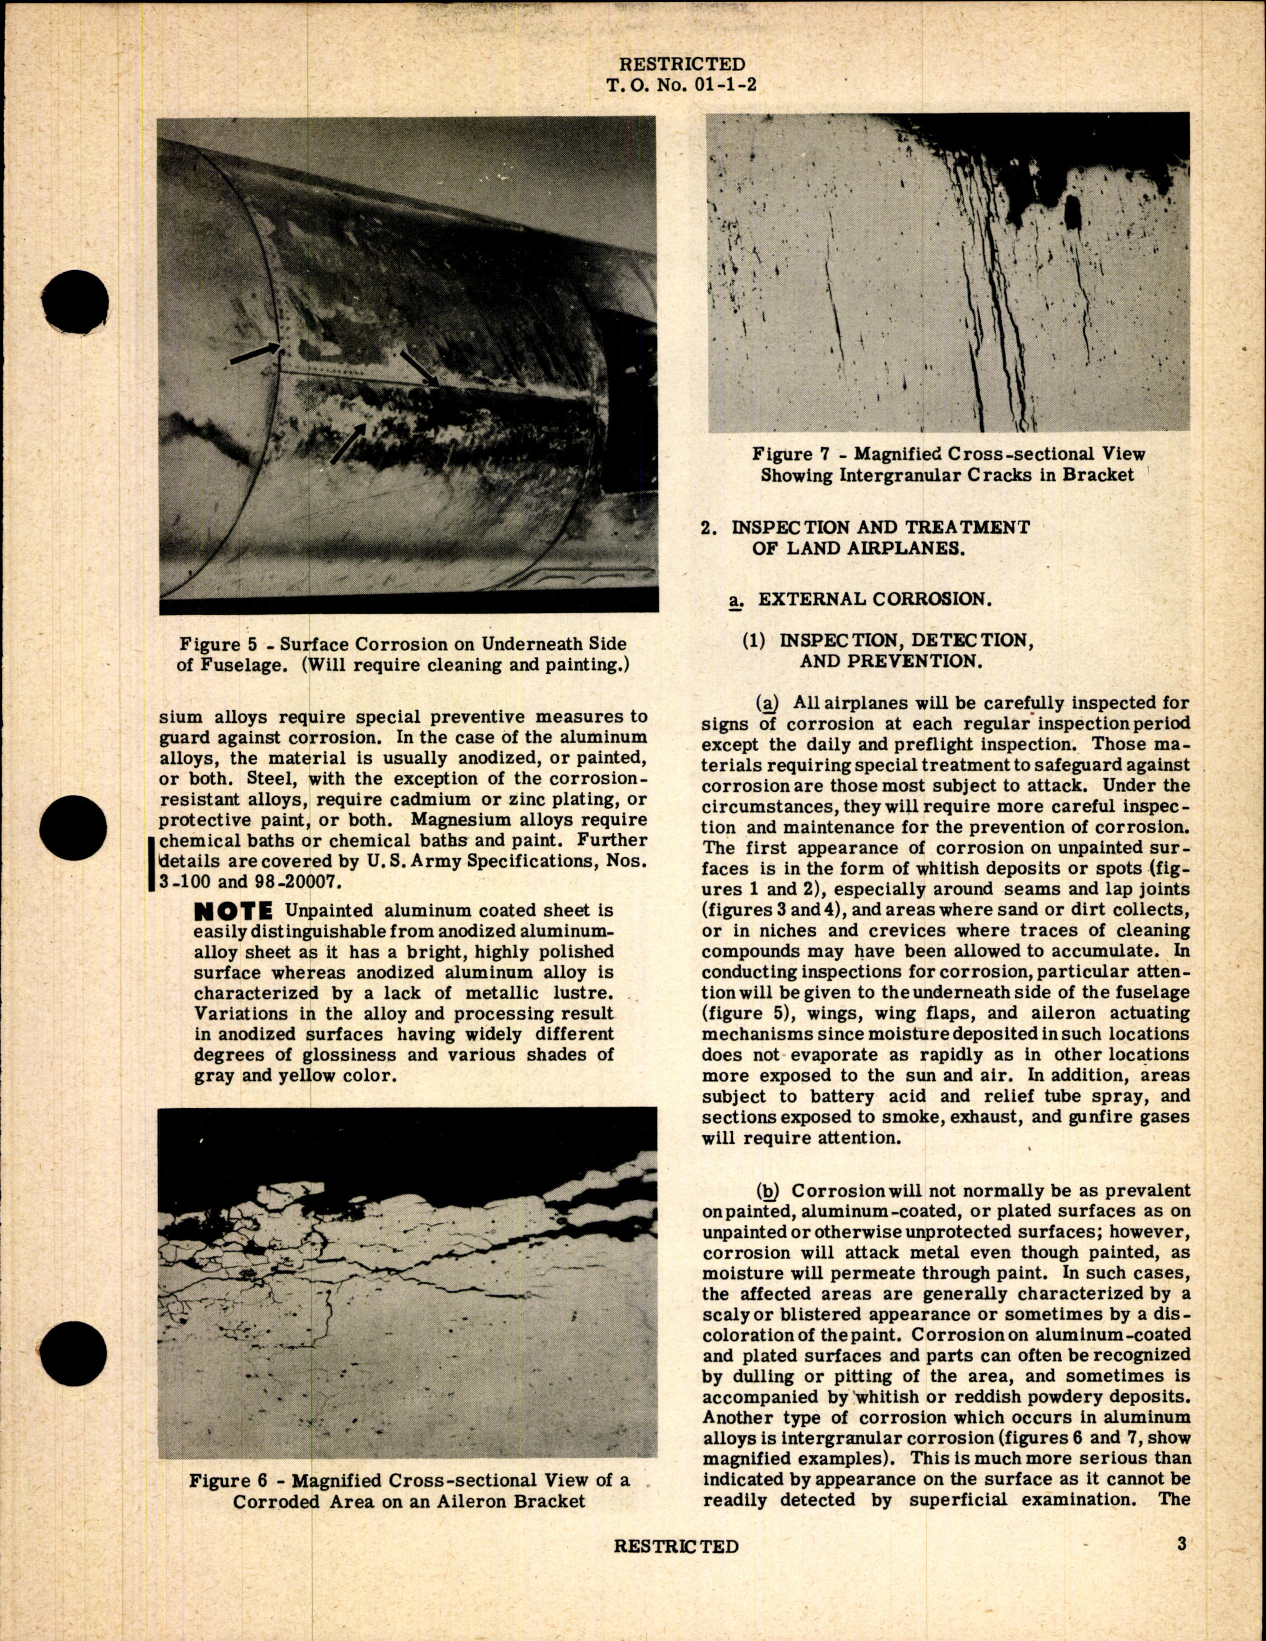 Sample page 3 from AirCorps Library document: Aircraft and Maintenance Parts; Corrosion treatment for Airplanes